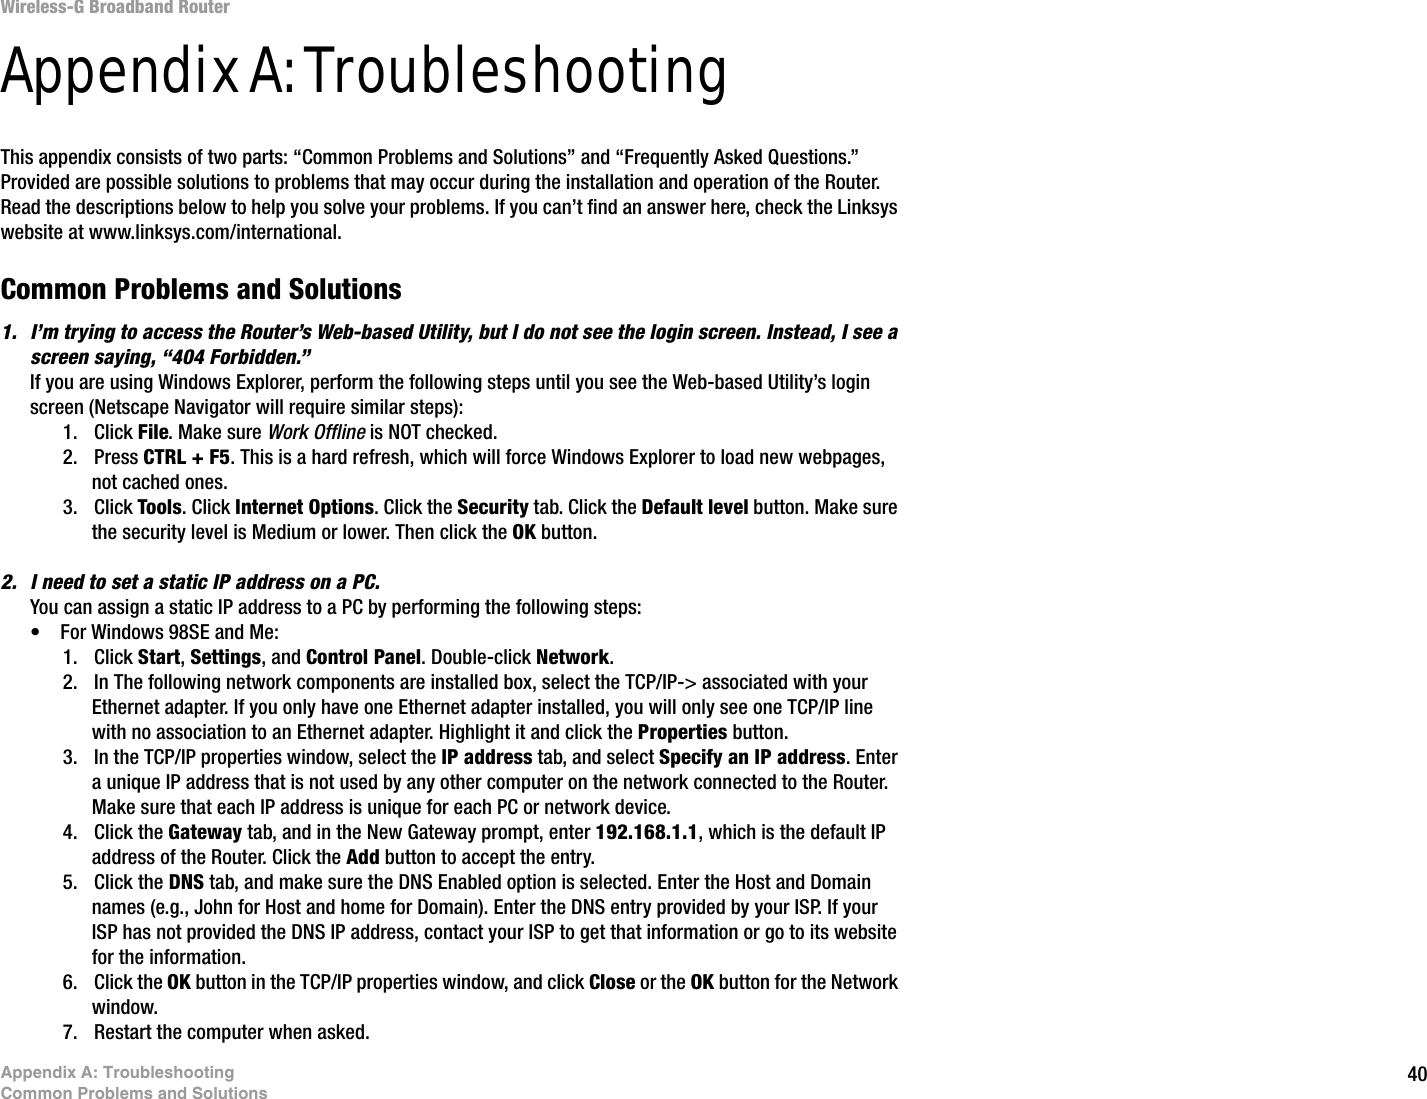 40Appendix A: TroubleshootingCommon Problems and SolutionsWireless-G Broadband RouterAppendix A: TroubleshootingThis appendix consists of two parts: “Common Problems and Solutions” and “Frequently Asked Questions.” Provided are possible solutions to problems that may occur during the installation and operation of the Router. Read the descriptions below to help you solve your problems. If you can’t find an answer here, check the Linksys website at www.linksys.com/international.Common Problems and Solutions1. I’m trying to access the Router’s Web-based Utility, but I do not see the login screen. Instead, I see a screen saying, “404 Forbidden.”If you are using Windows Explorer, perform the following steps until you see the Web-based Utility’s login screen (Netscape Navigator will require similar steps):1. Click File. Make sure Work Offline is NOT checked.2. Press CTRL + F5. This is a hard refresh, which will force Windows Explorer to load new webpages, not cached ones.3. Click Tools. Click Internet Options. Click the Security tab. Click the Default level button. Make sure the security level is Medium or lower. Then click the OK button.2. I need to set a static IP address on a PC.You can assign a static IP address to a PC by performing the following steps:• For Windows 98SE and Me:1. Click Start, Settings, and Control Panel. Double-click Network.2. In The following network components are installed box, select the TCP/IP-&gt; associated with your Ethernet adapter. If you only have one Ethernet adapter installed, you will only see one TCP/IP line with no association to an Ethernet adapter. Highlight it and click the Properties button.3. In the TCP/IP properties window, select the IP address tab, and select Specify an IP address. Enter a unique IP address that is not used by any other computer on the network connected to the Router. Make sure that each IP address is unique for each PC or network device.4. Click the Gateway tab, and in the New Gateway prompt, enter 192.168.1.1, which is the default IP address of the Router. Click the Add button to accept the entry.5. Click the DNS tab, and make sure the DNS Enabled option is selected. Enter the Host and Domain names (e.g., John for Host and home for Domain). Enter the DNS entry provided by your ISP. If your ISP has not provided the DNS IP address, contact your ISP to get that information or go to its website for the information.6. Click the OK button in the TCP/IP properties window, and click Close or the OK button for the Network window.7. Restart the computer when asked.